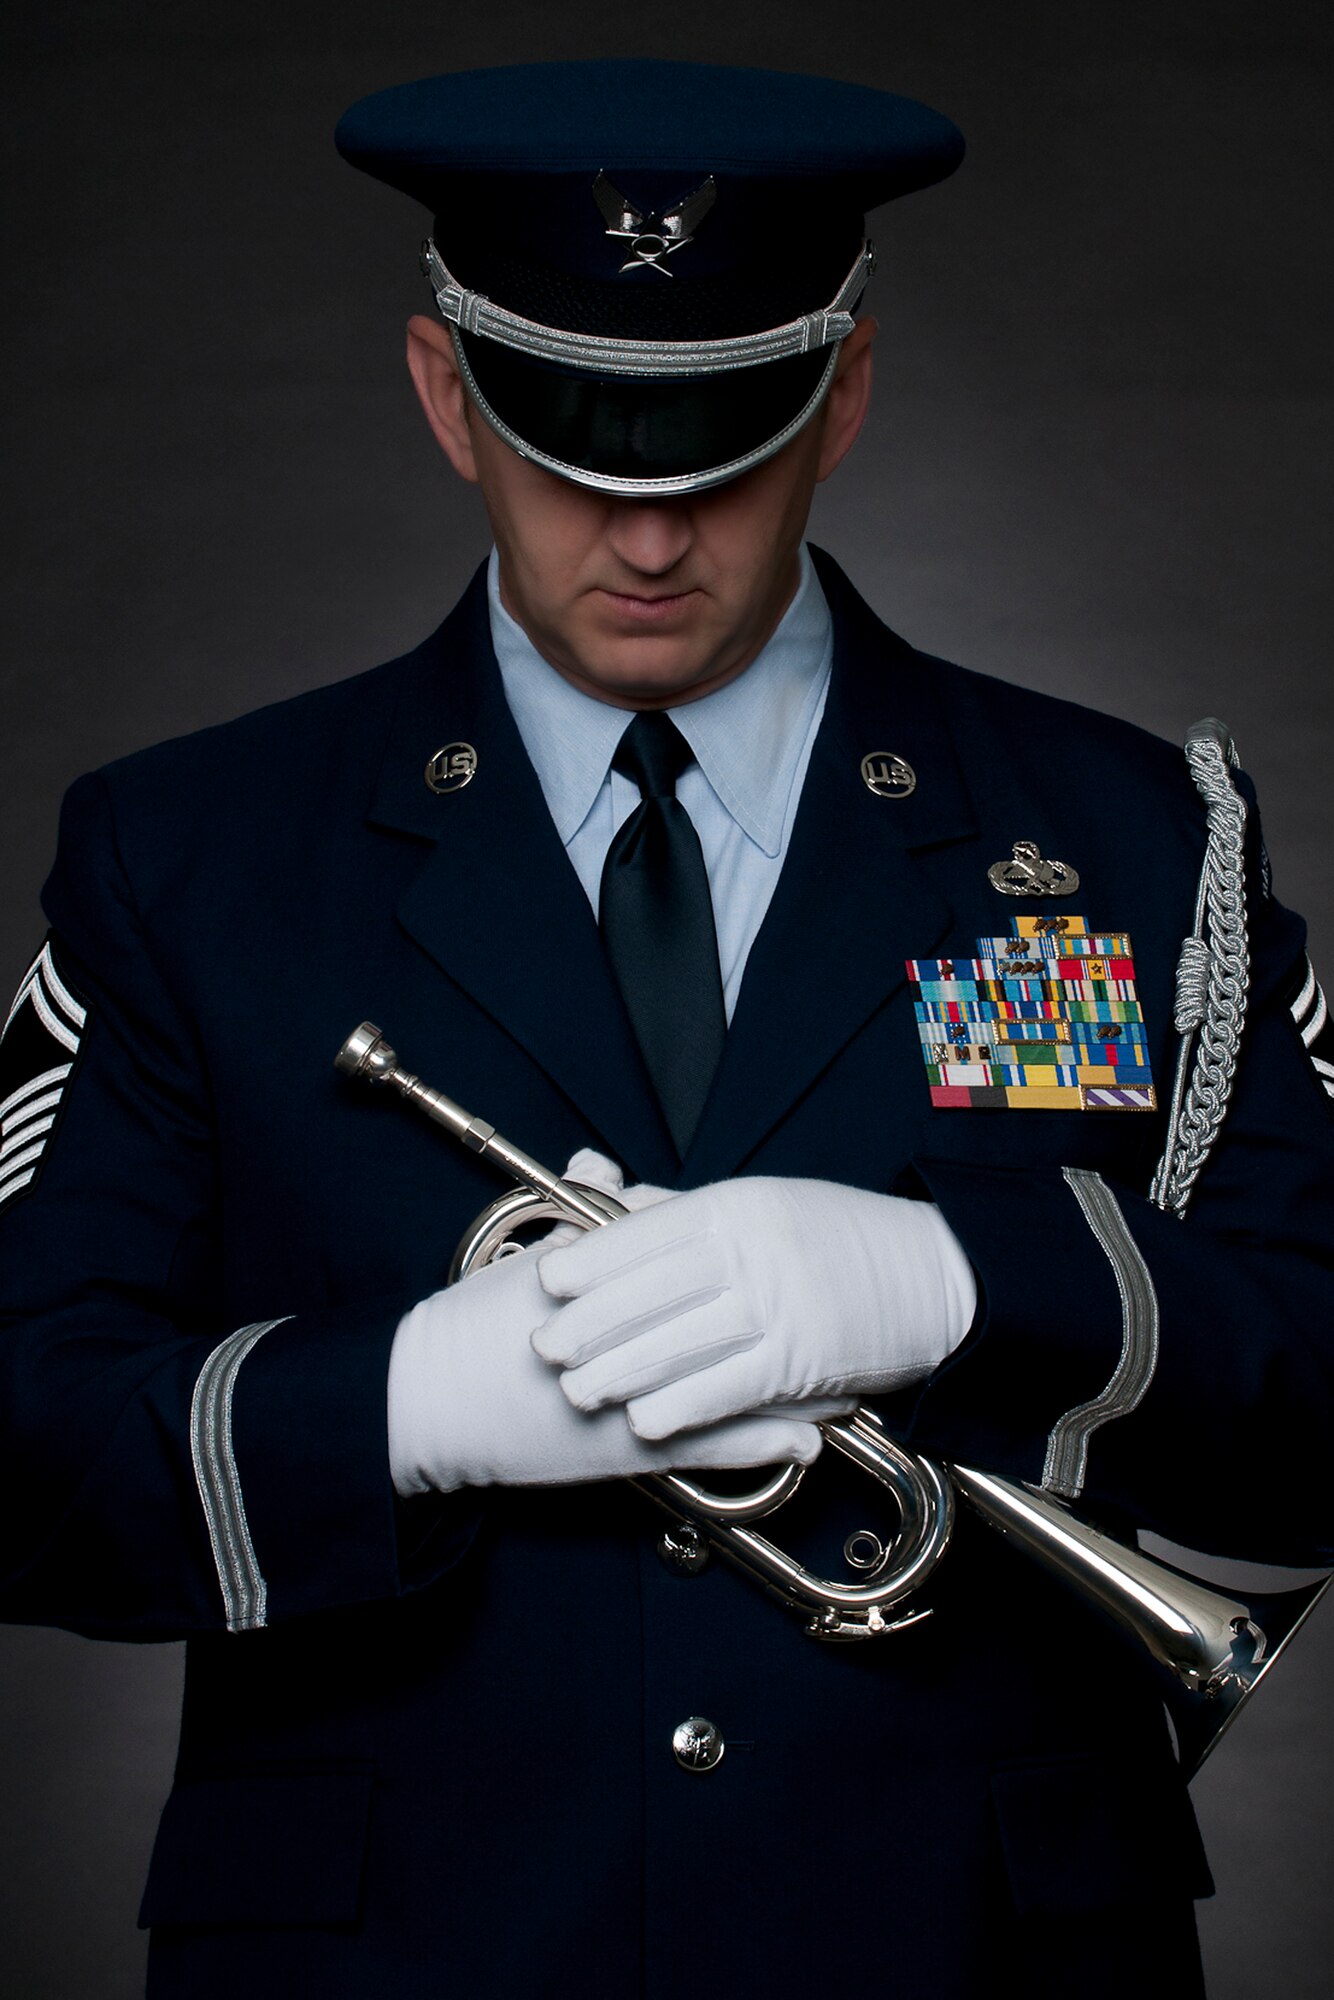 Senior Master Sgt Todd Kirkwood, 167th Airlift Wing avionics supervisor and base honor guard member, recently stepped up to play Taps at a funeral when the electronic device in the Ceremonial Bugle being used by the civilian color guard team failed to sound. Kirkwood and one other member of the unit's honor guard were tasked to fold the flag and present it to the family, but when the bugle failed Kirkwood was able to remove the electronic device from the instrument and sound Taps, which he only recently learned to play. (U.S. Air Force photo by Master Sgt. Emily Bieghtol-Deyerle)